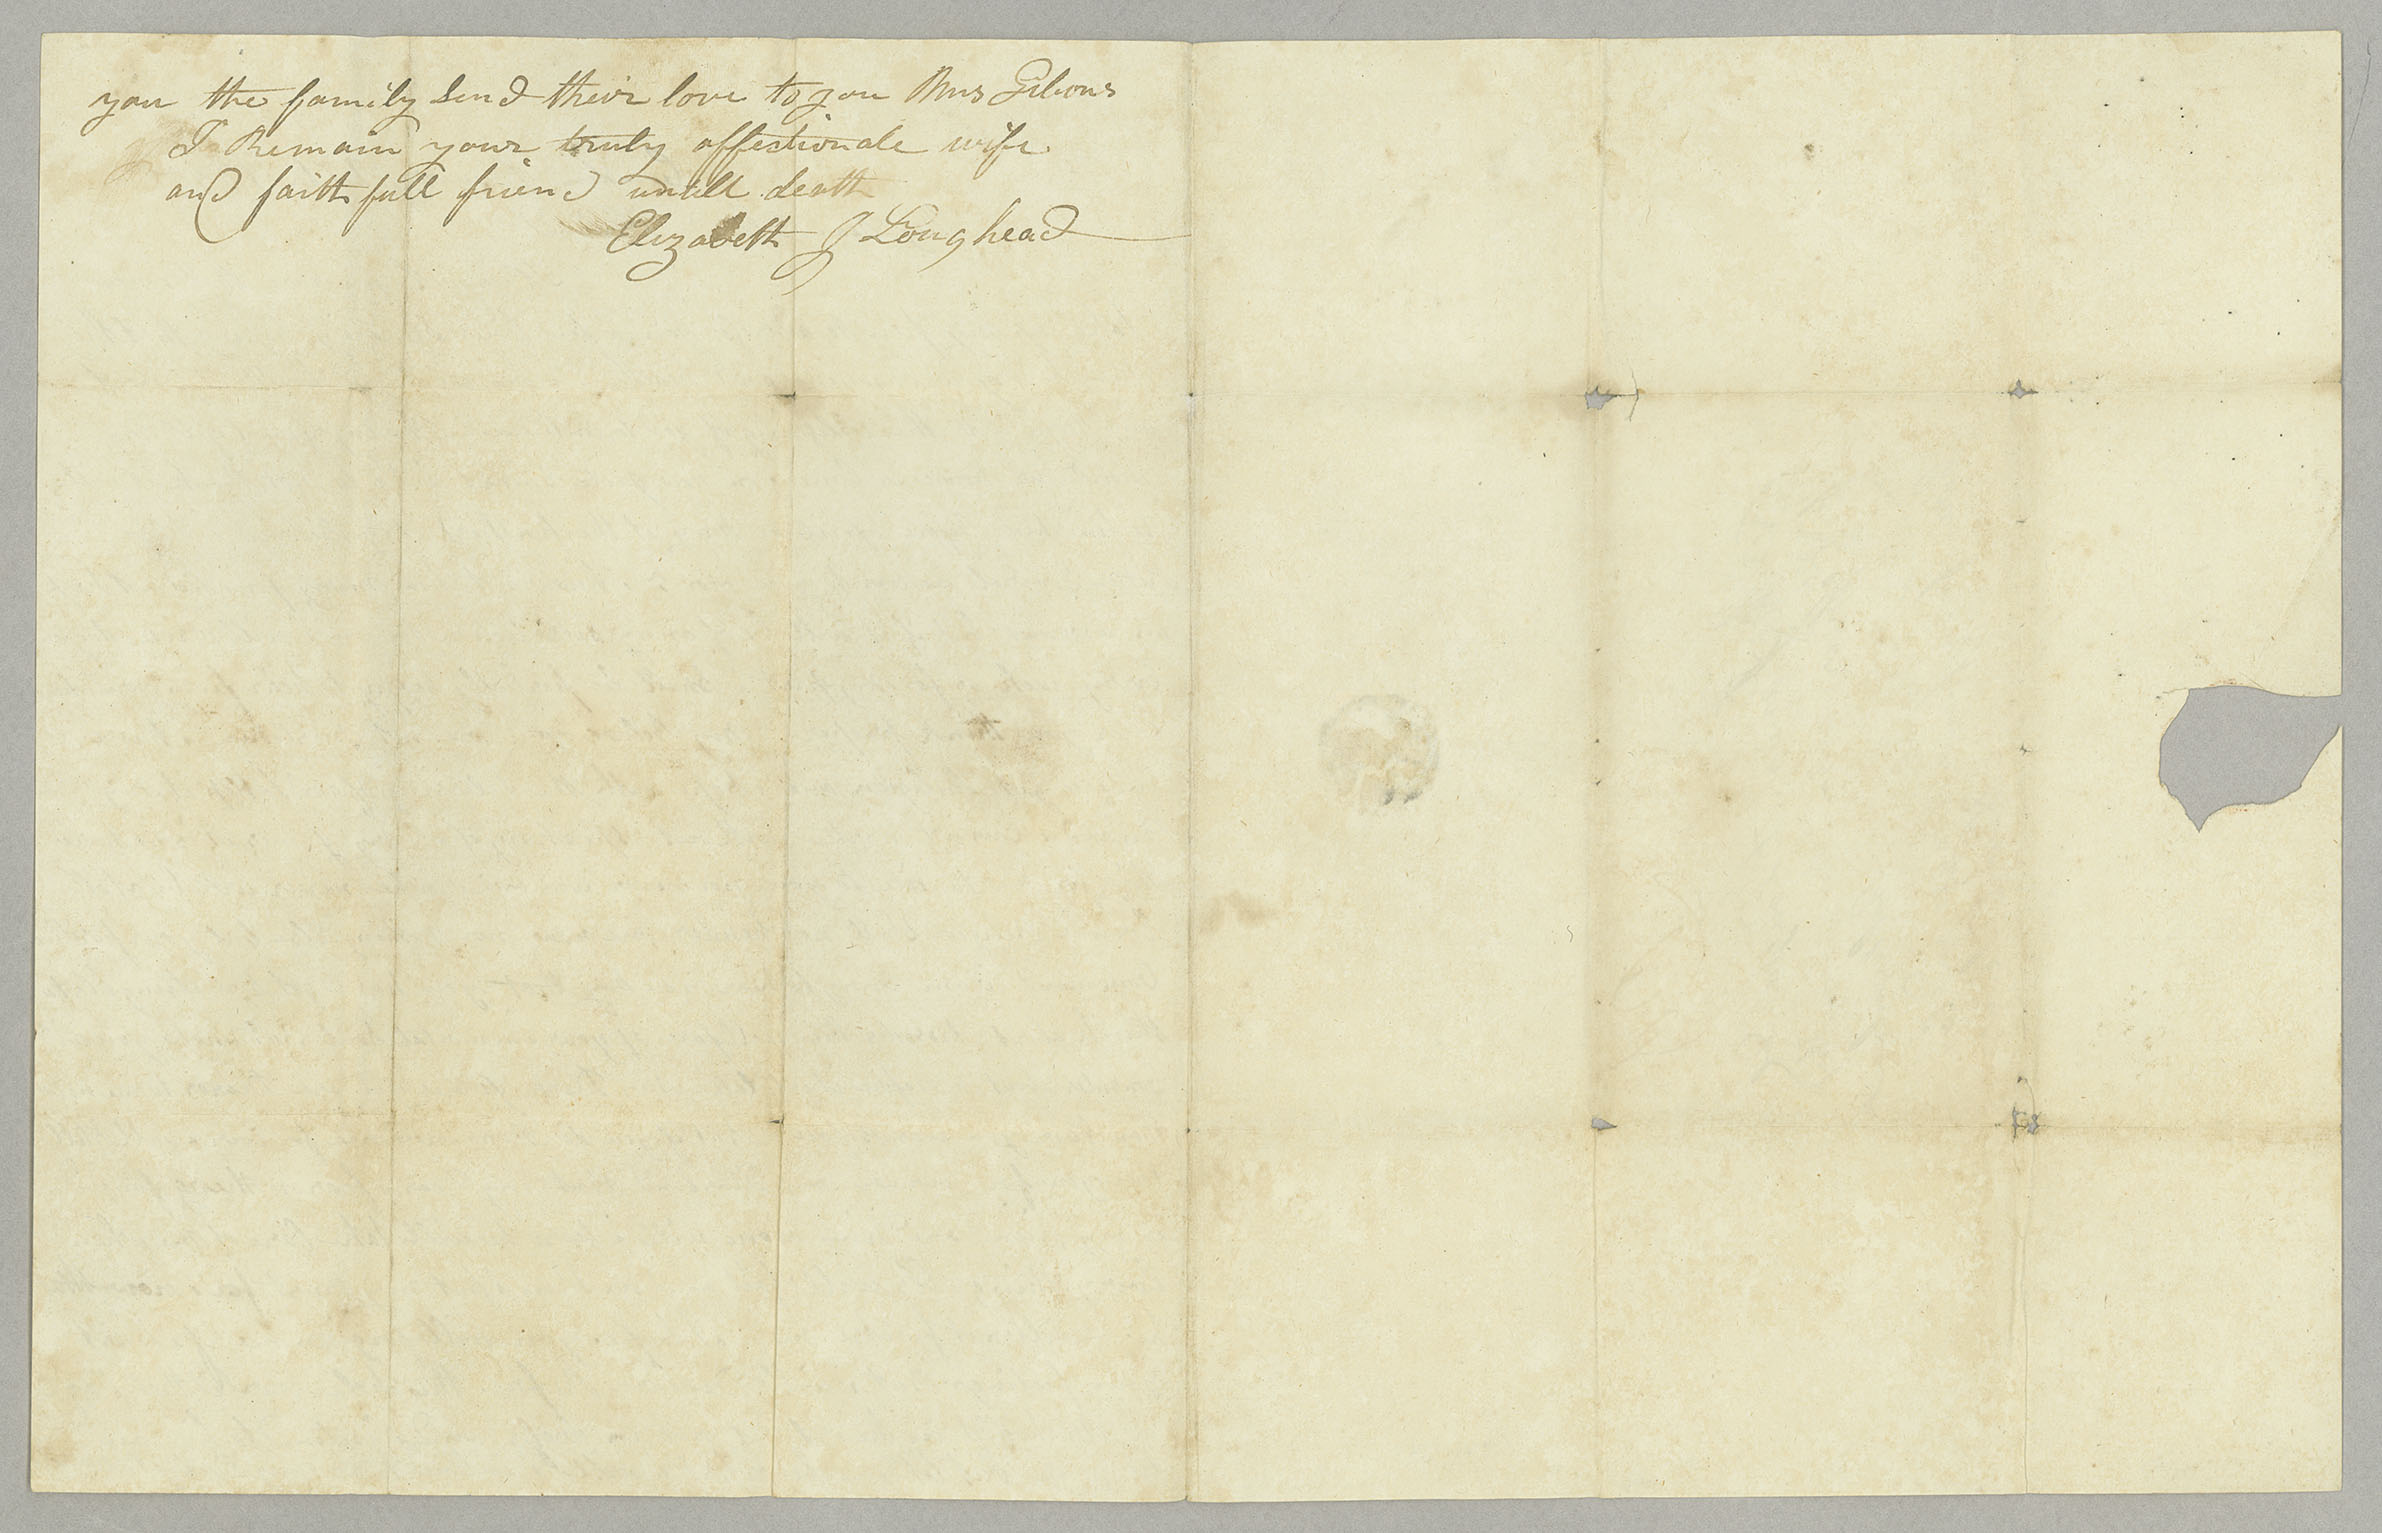 Letter, Elizabeth J. Loughead, Camden, [New Jersey], to James A. Loughead, New Orleans, Louisiana, Page 2